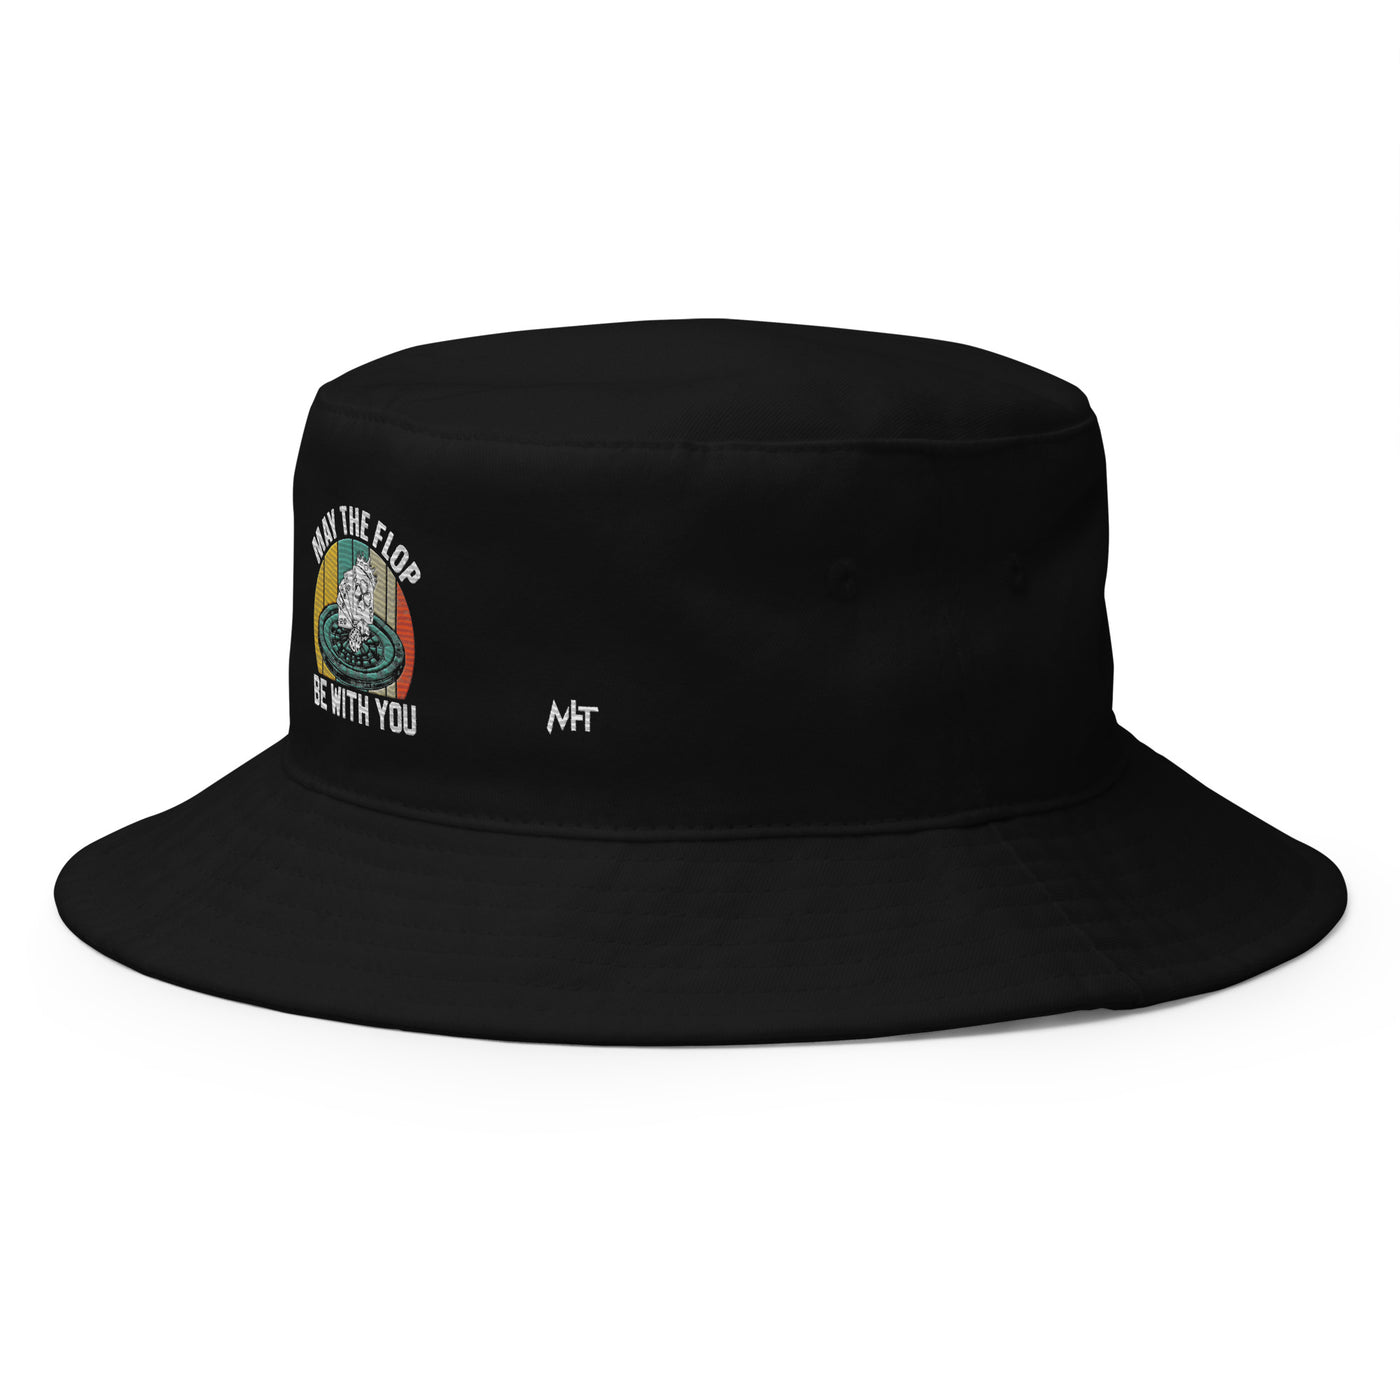 May the Flop be with you - Bucket Hat